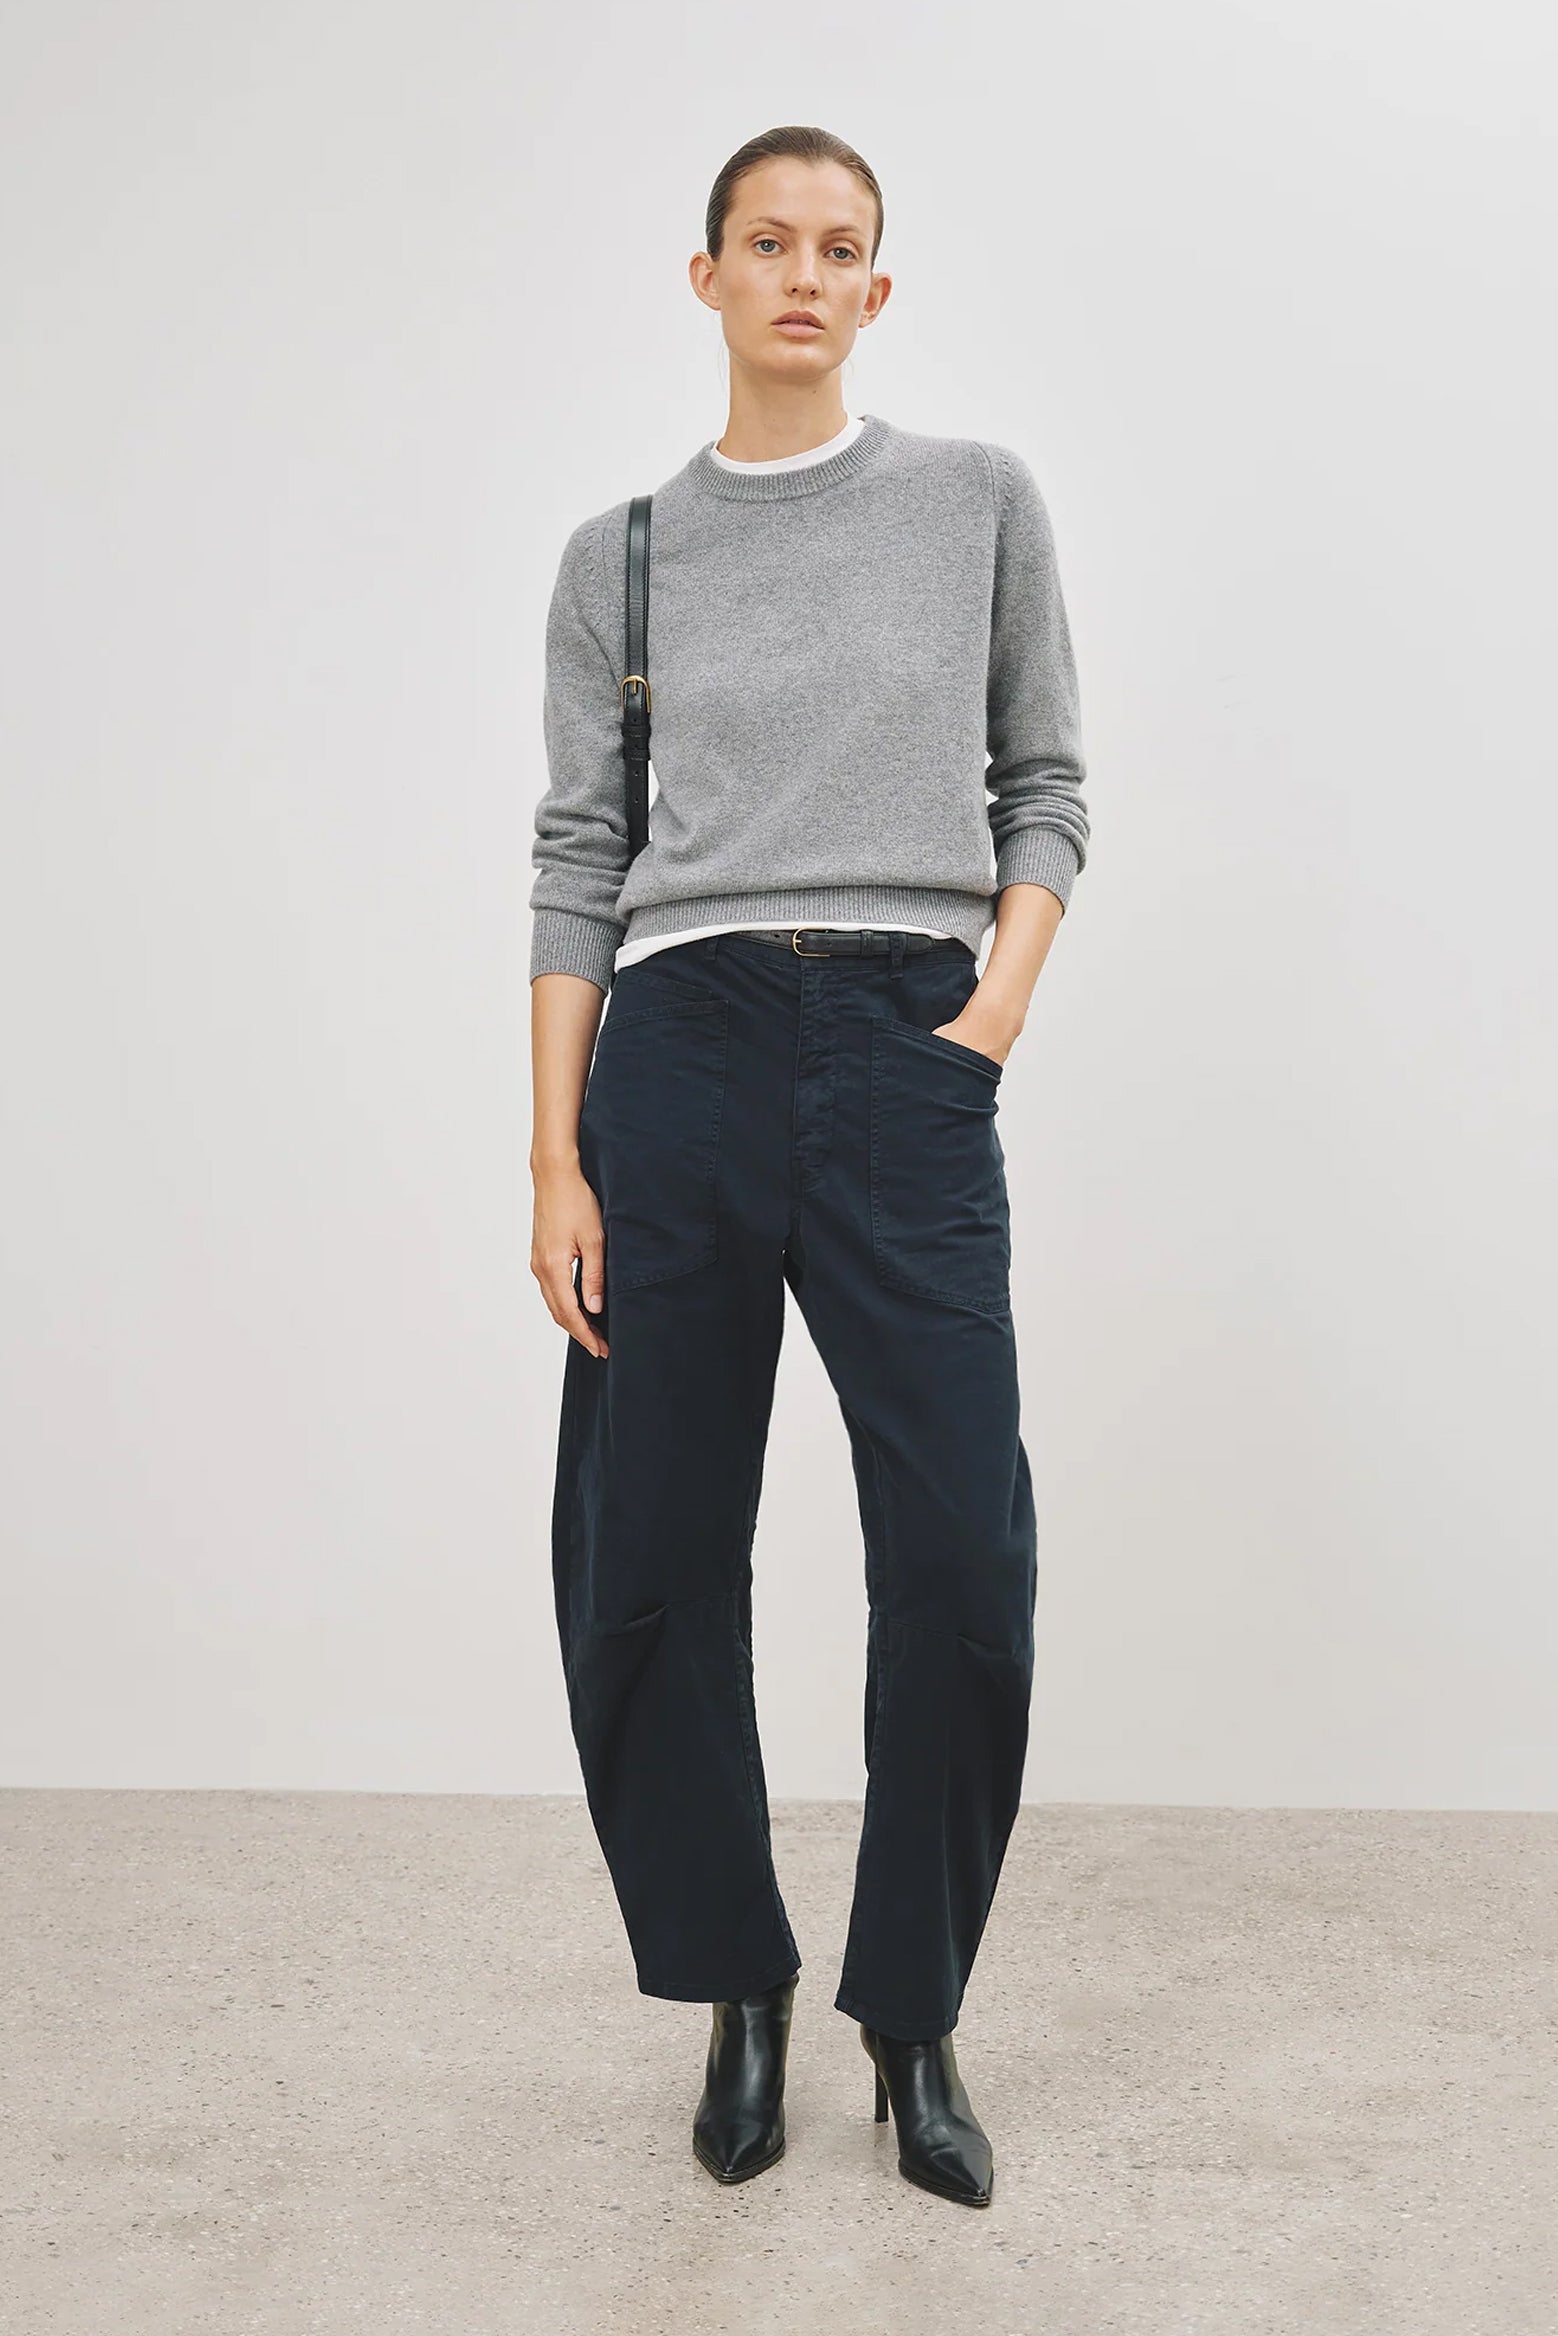 Nilli Lotan Shon Pant in Midnight available at The New Trend Australia.